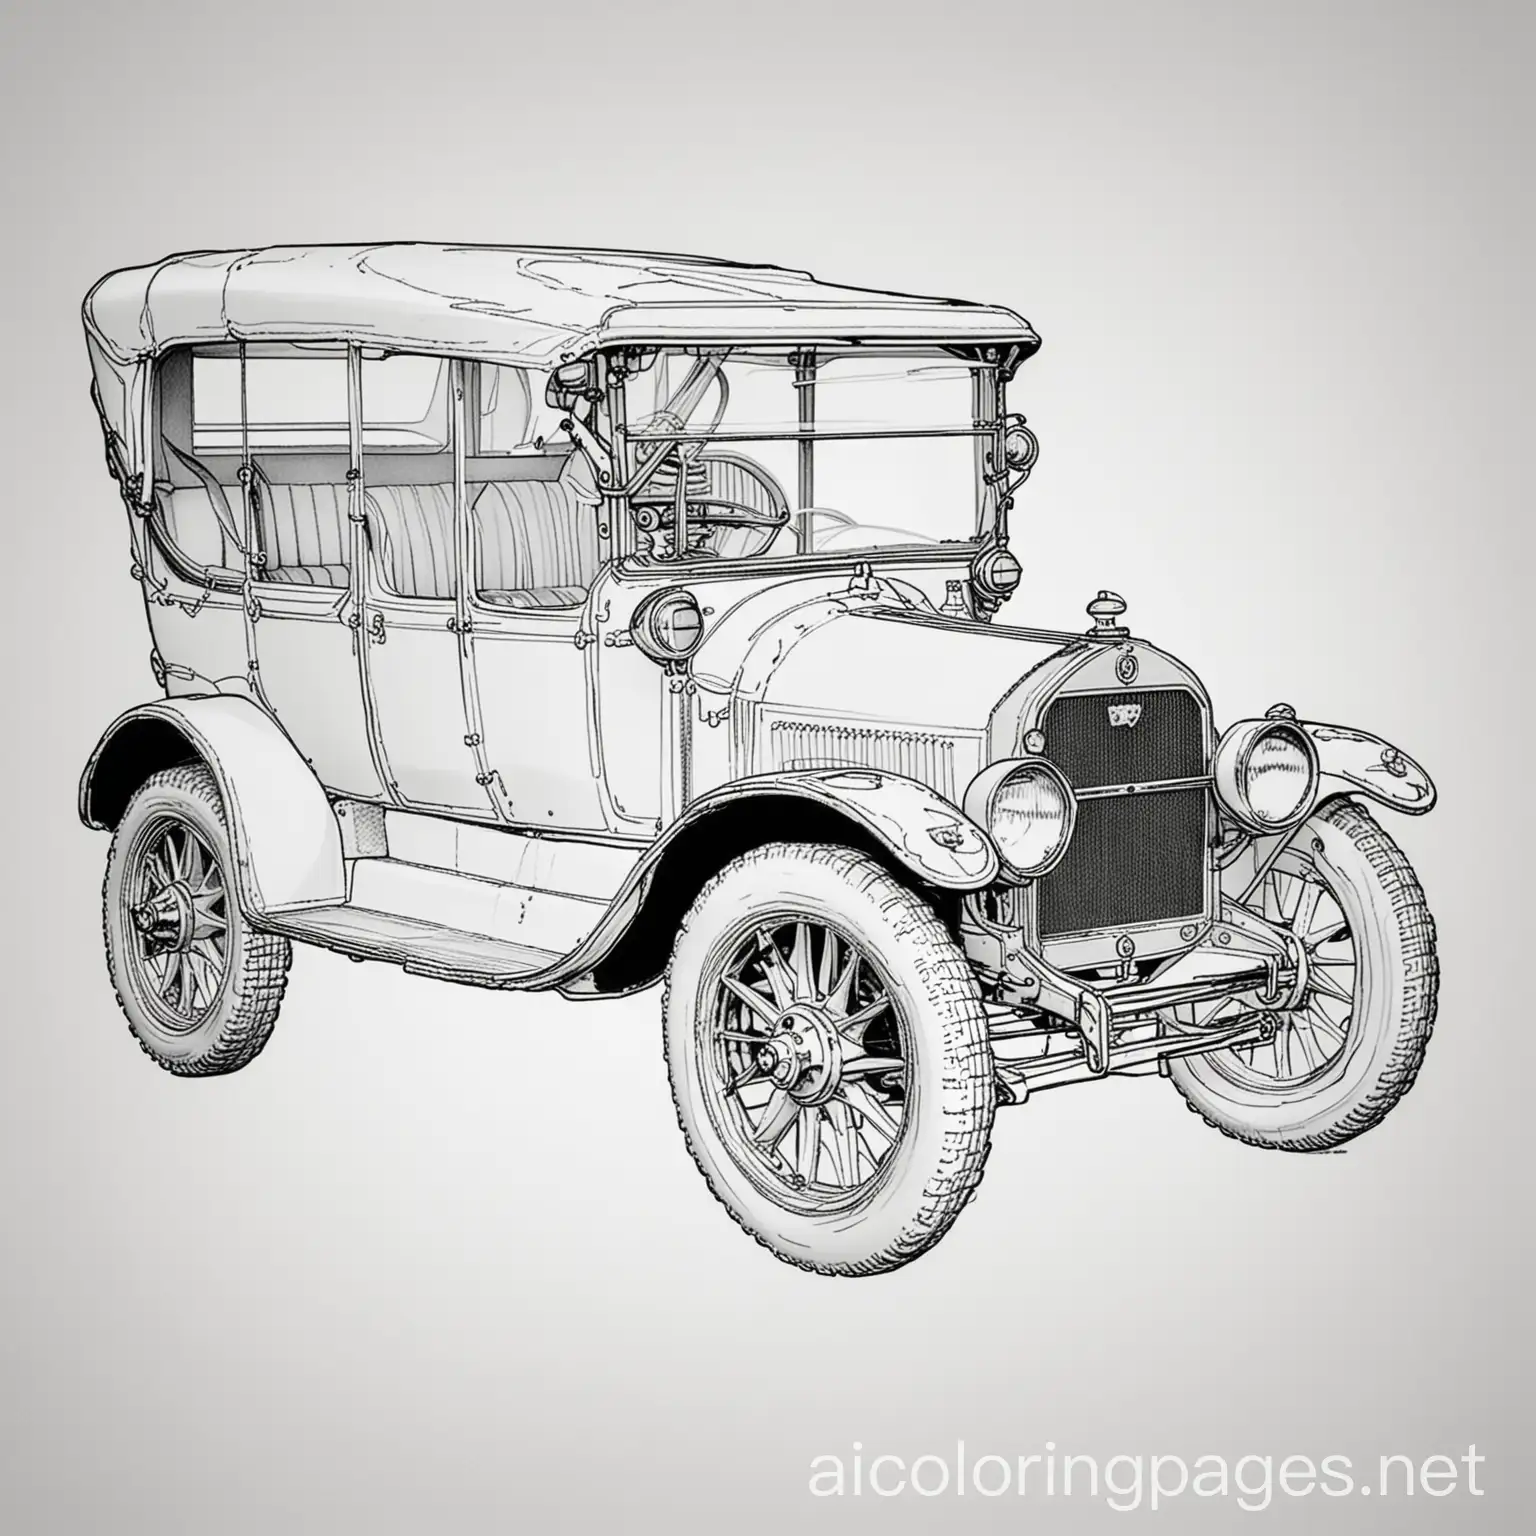  Dodge Model 30-35 from 1914, also named "old Betsy"  coloring page, Coloring Page, black and white, line art, white background, Simplicity, Ample White Space. The background of the coloring page is plain white to make it easy for young children to color within the lines. The outlines of all the subjects are easy to distinguish, making it simple for kids to color without too much difficulty